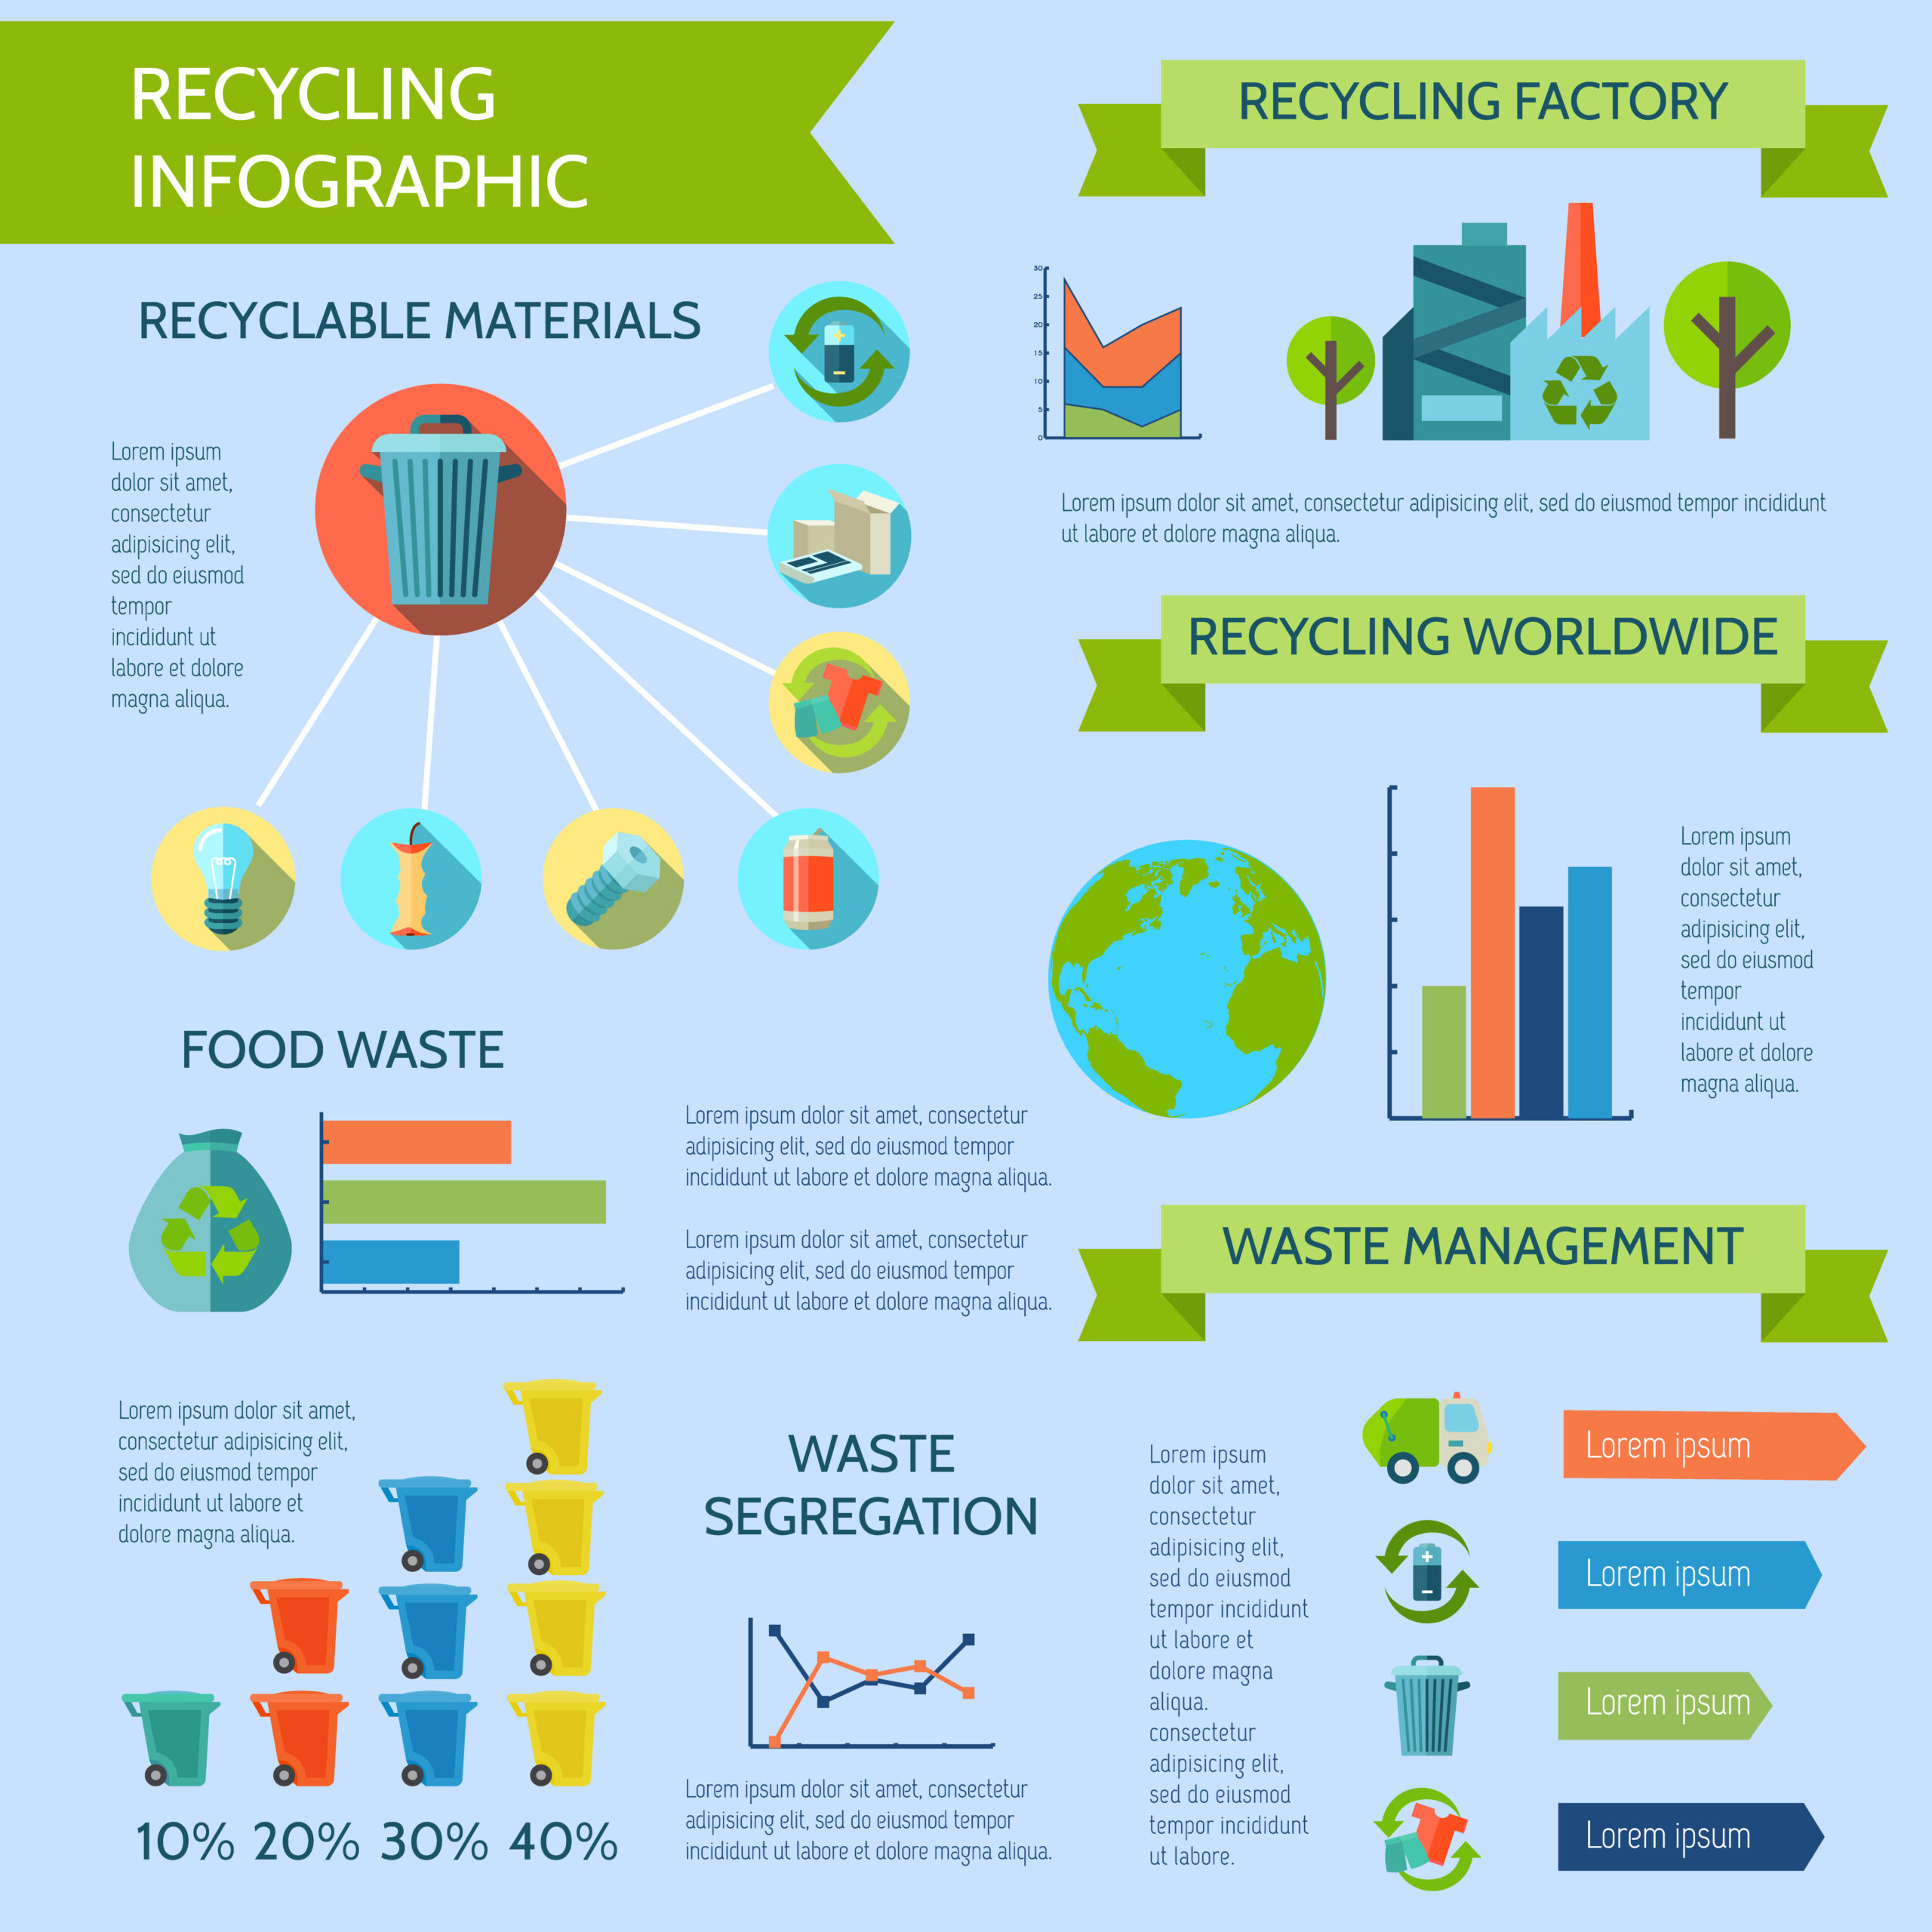 [INFOGRAPHIC] Recycling by the Numbers